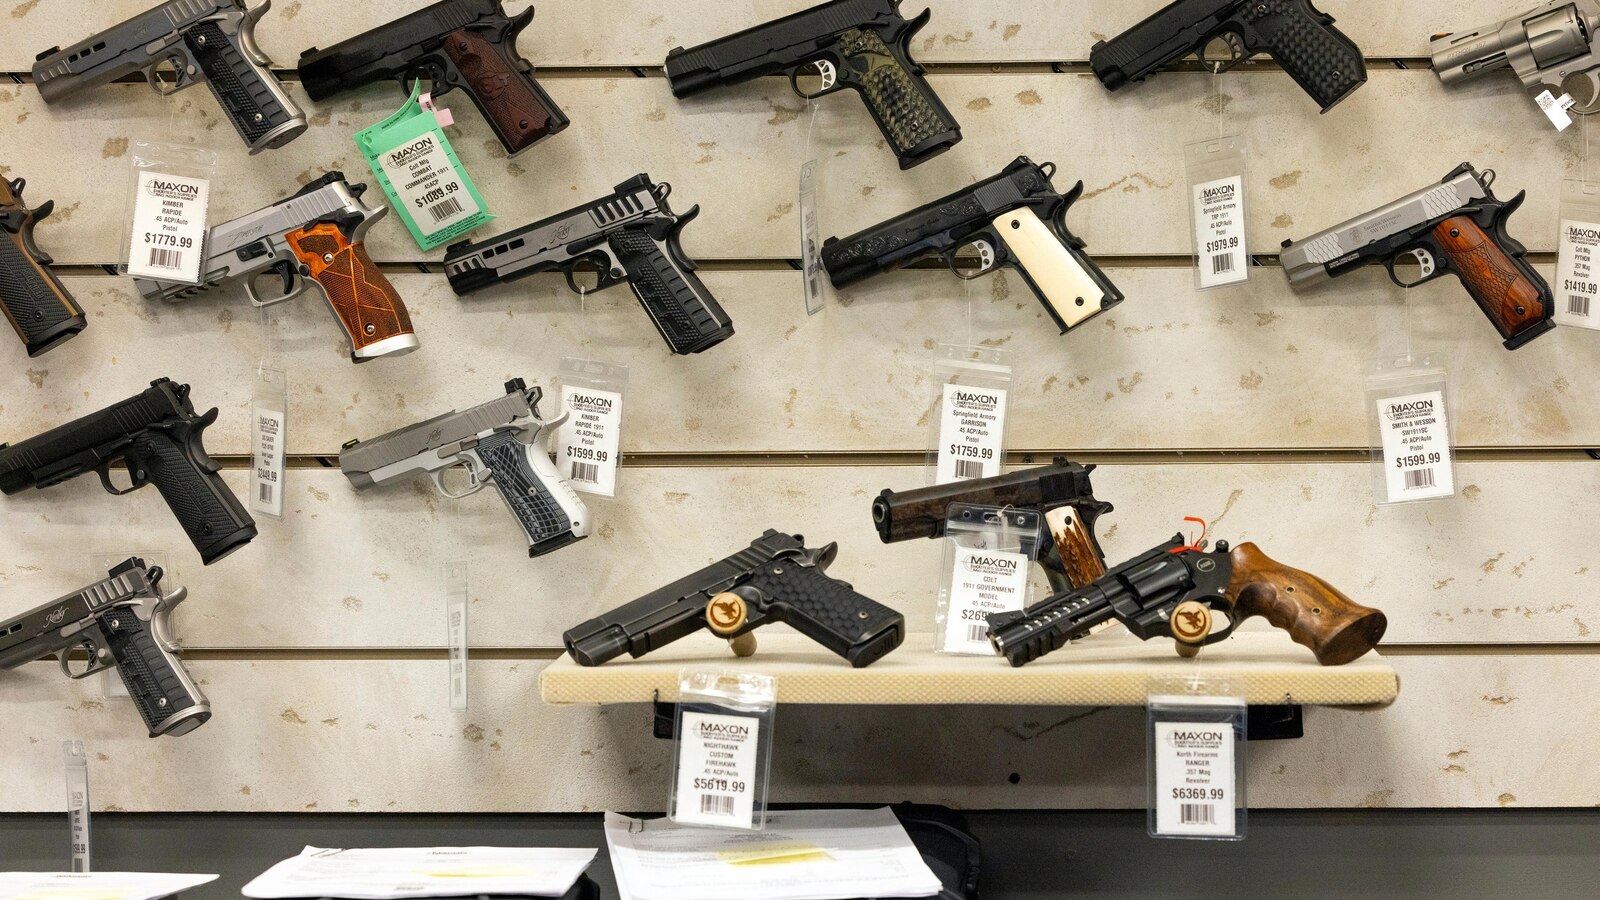 Should gun store sales get special credit card tracking? States are split